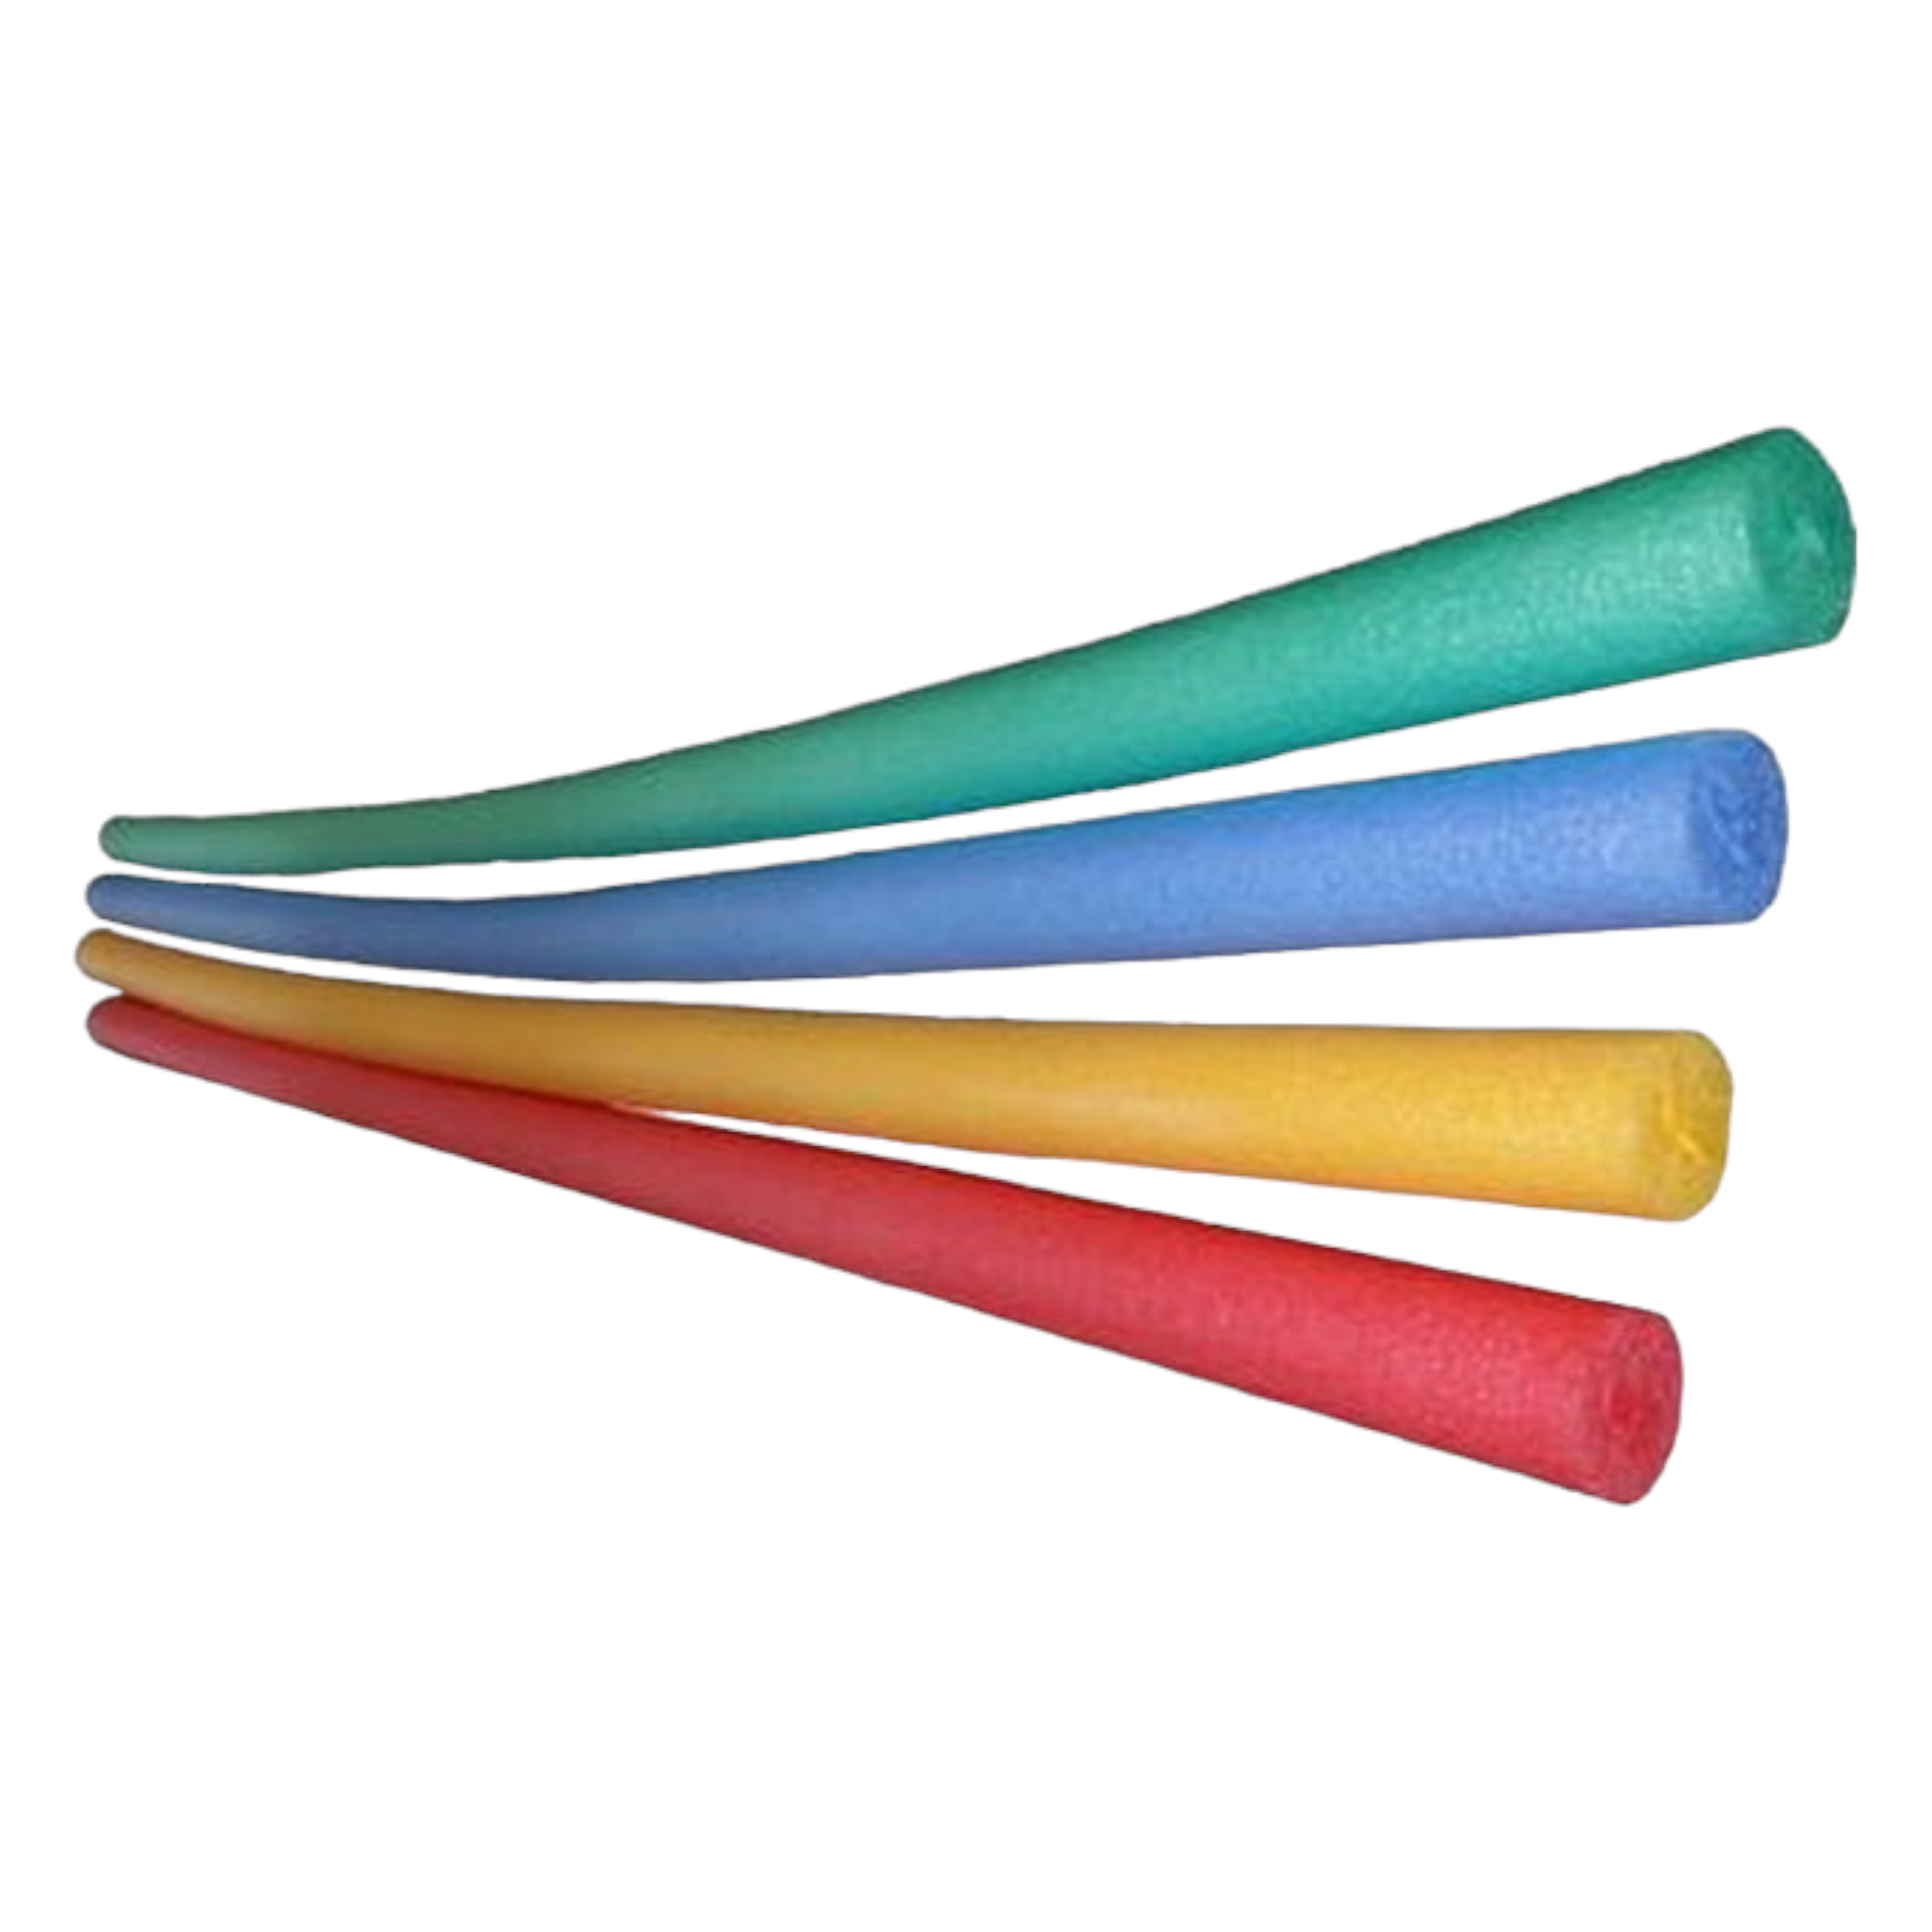 Swimming Pool Noodle 150cm High Density Solid Core